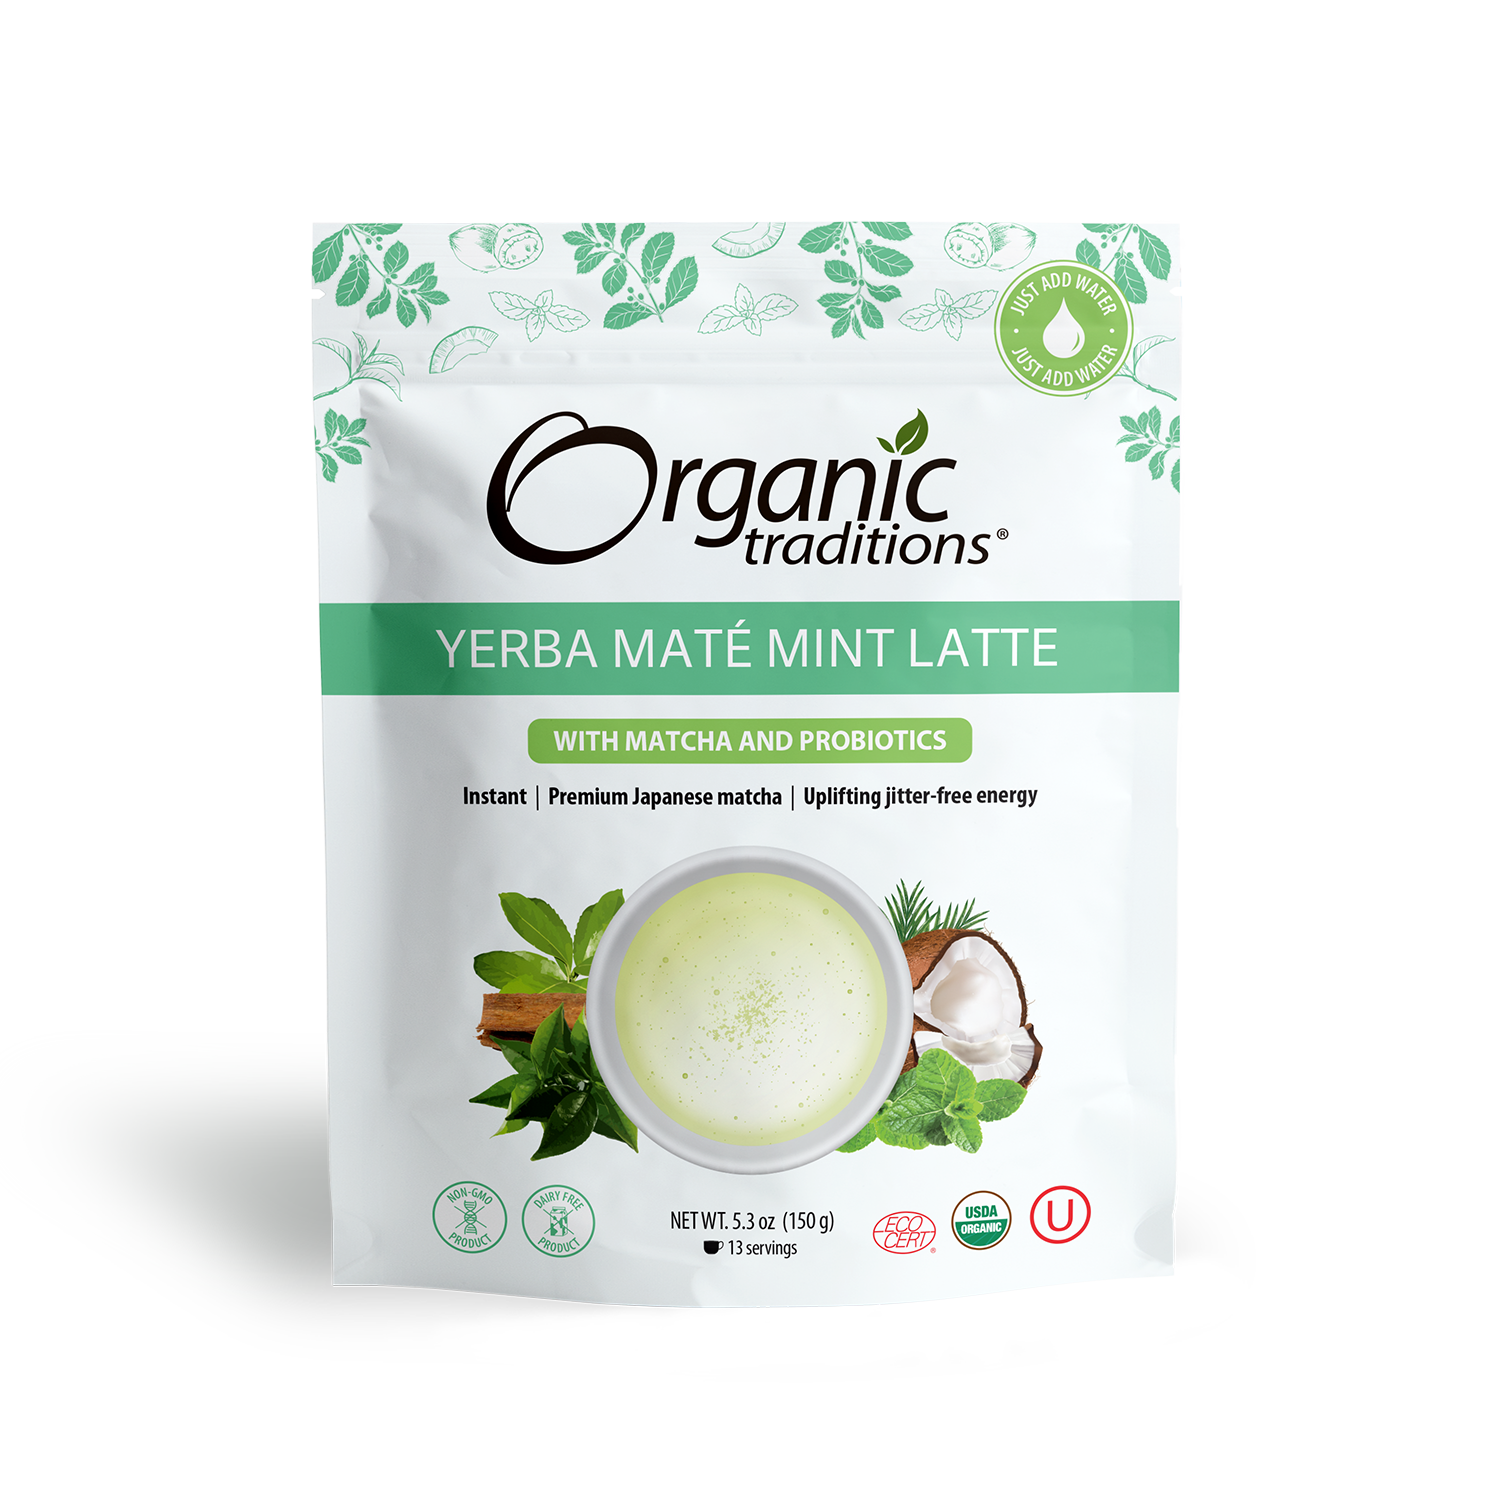 organic traditions yerba mate mint latte with matcha and probiotic front of bag image